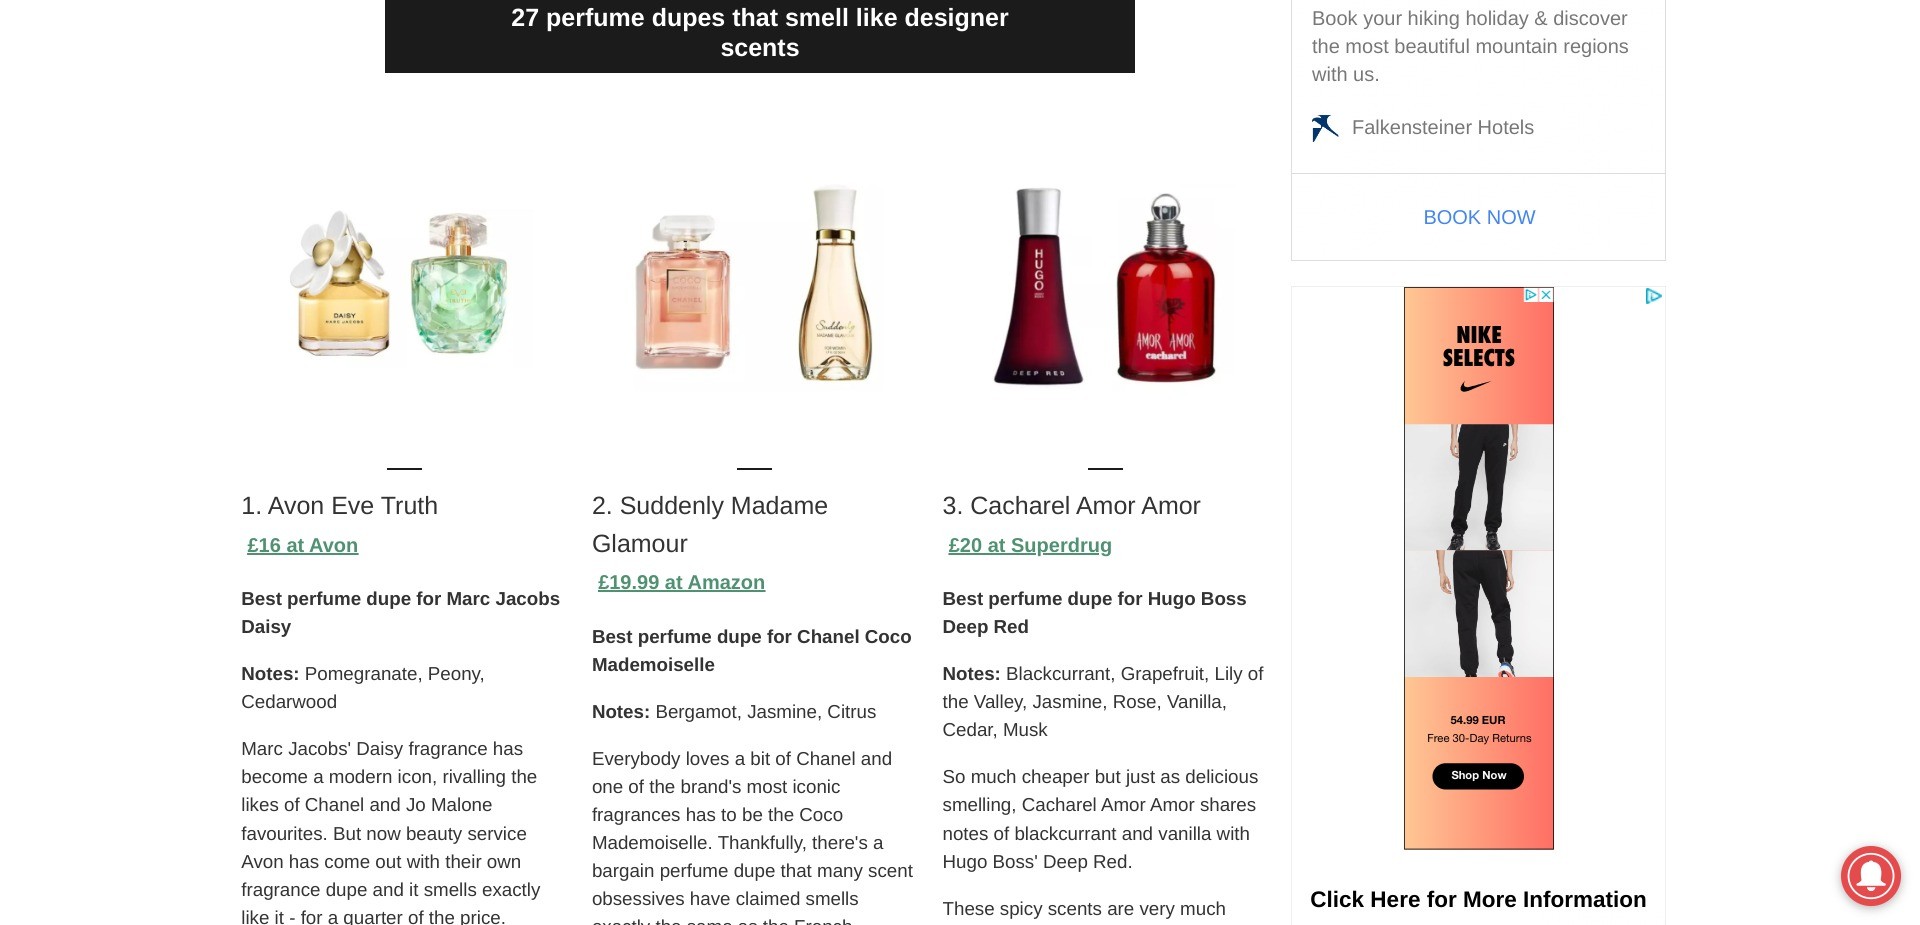 Screenshot of an article on https://www.goodto.com/wellbeing/28-cheap-perfumes-that-smell-just-like-designer-scents-108852 displaying luxury perfumes and suggesting cheaper duplicate products